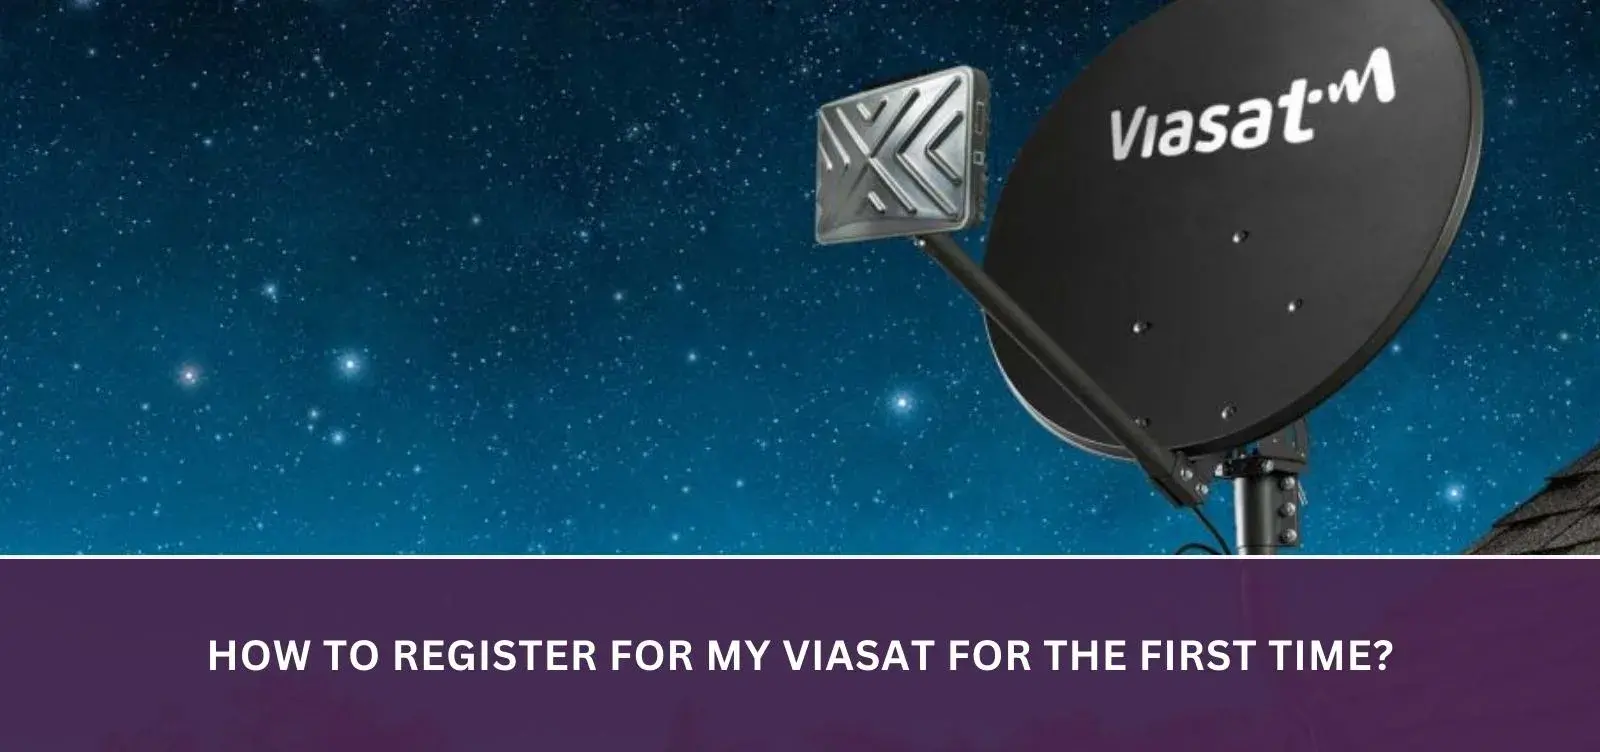 How to register for My Viasat for the first time?